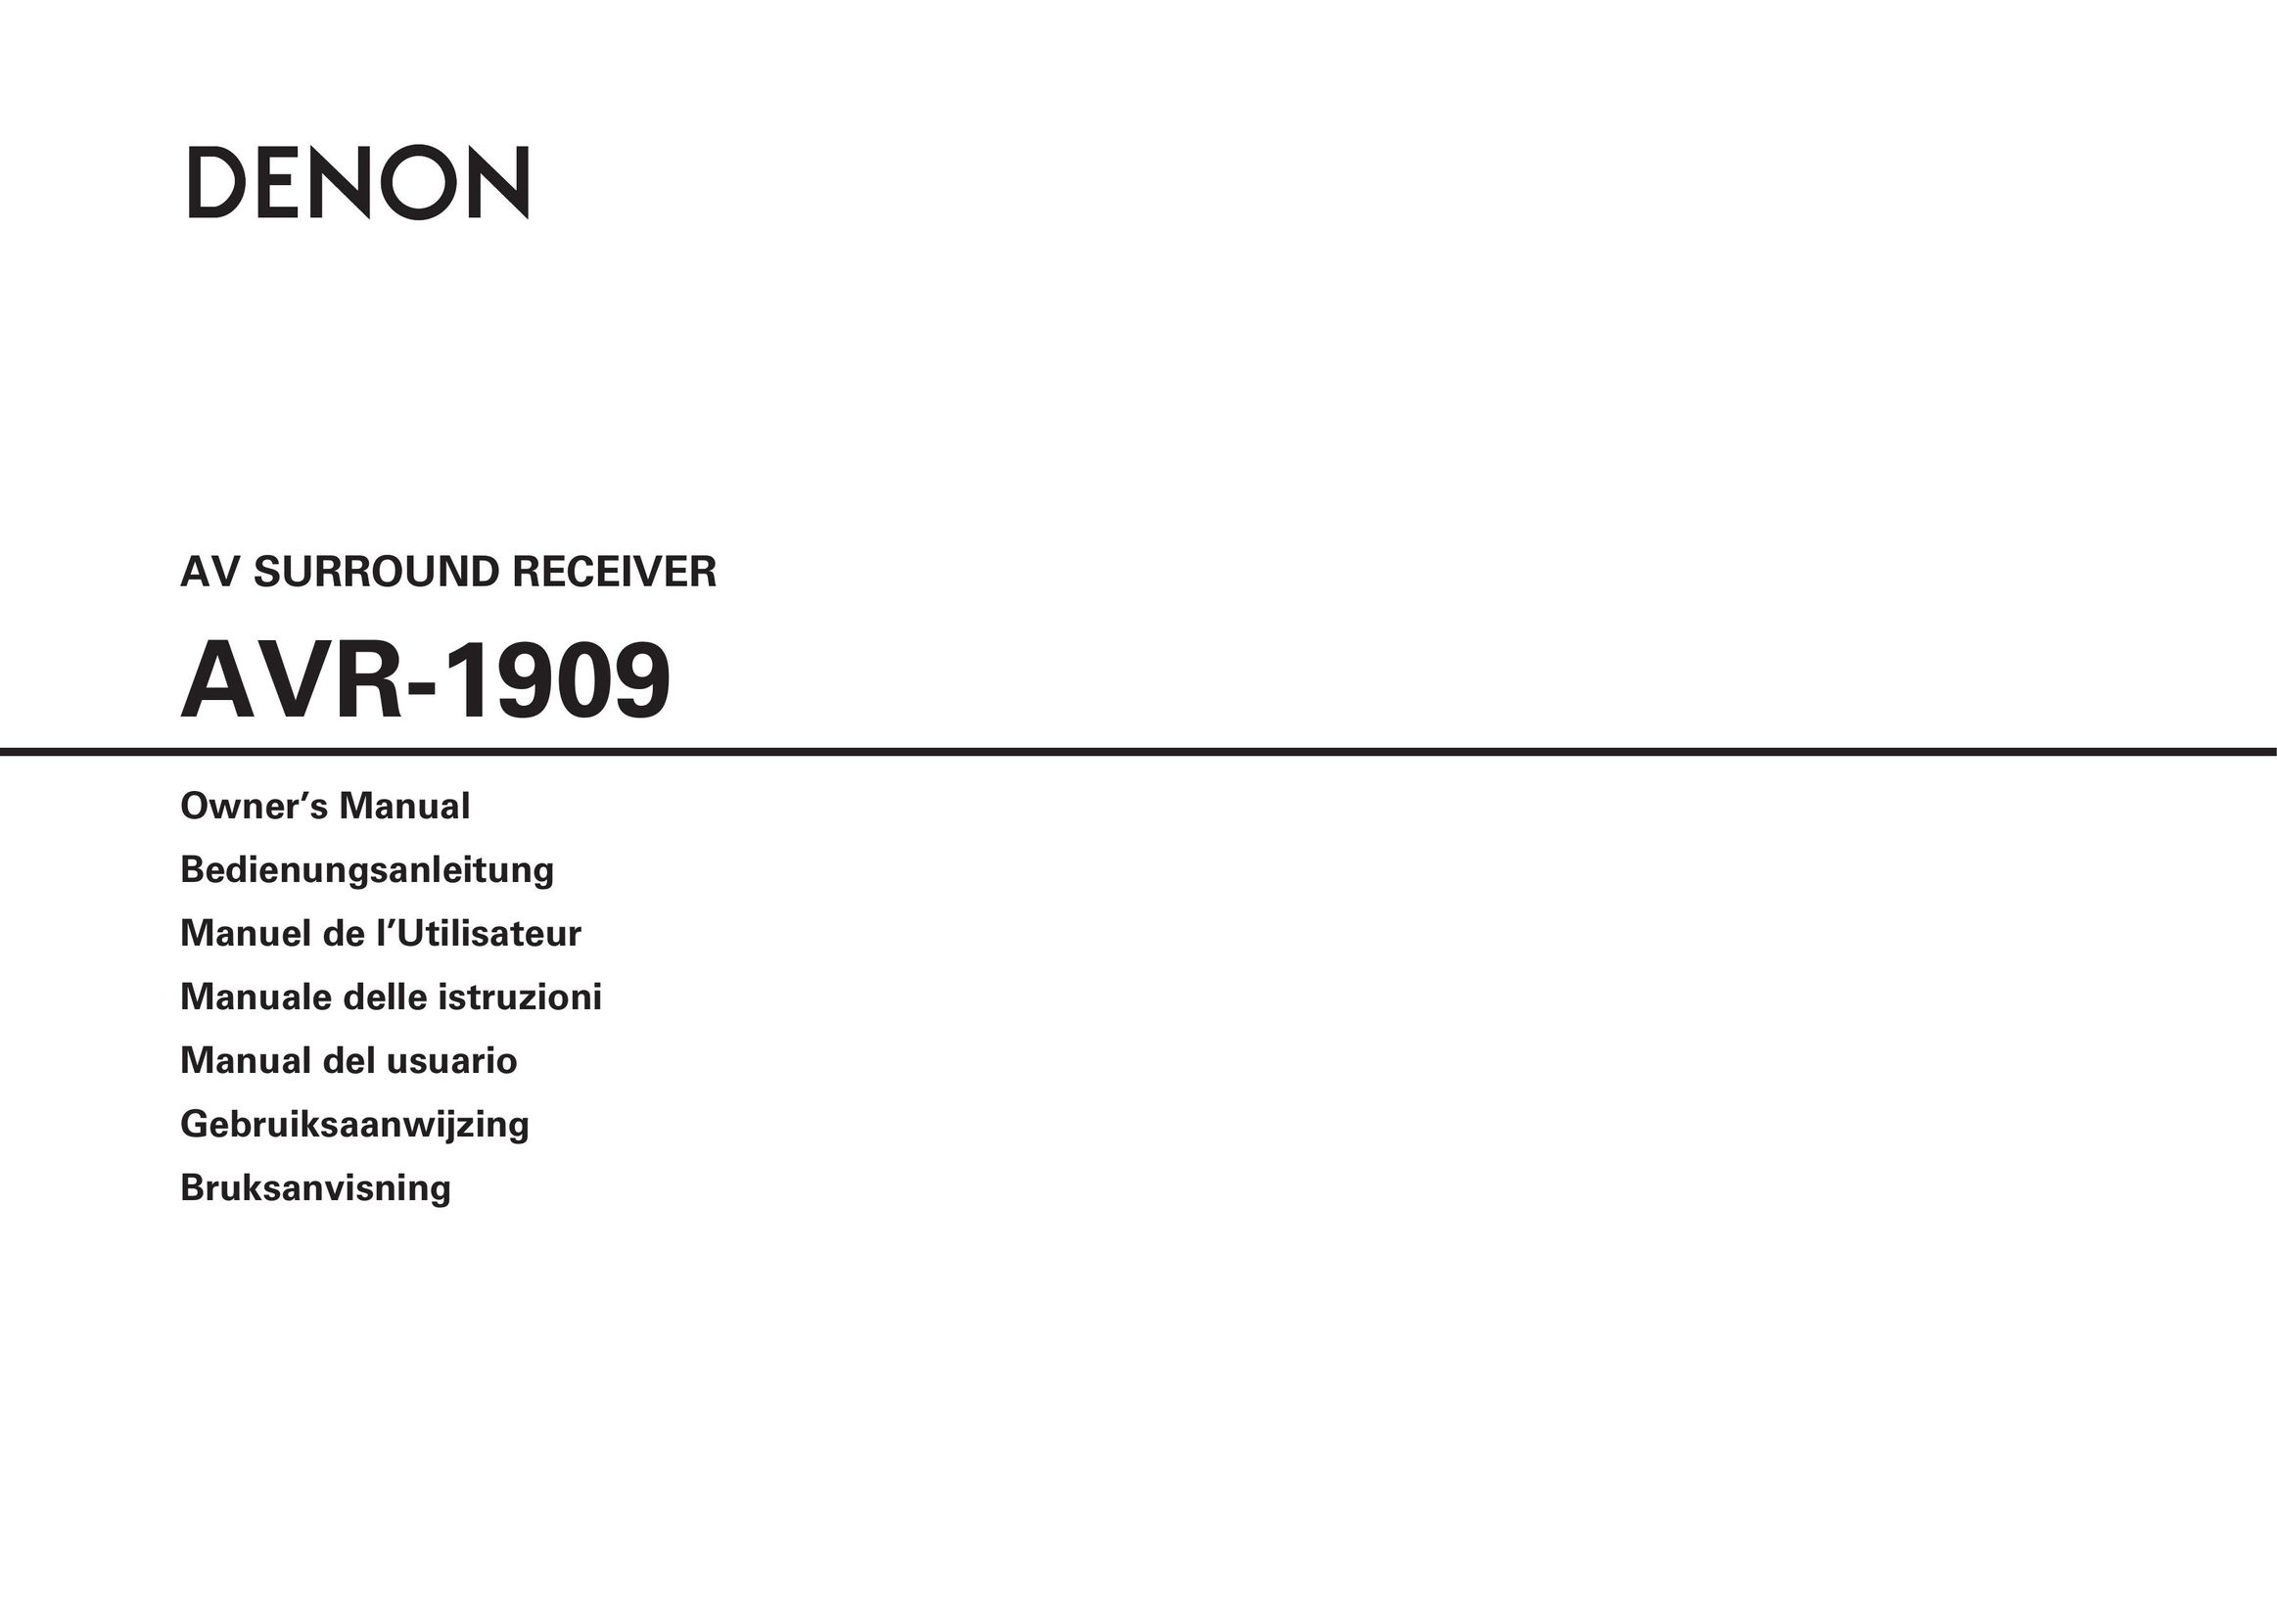 Denon AVR-1909 Home Theater System User Manual